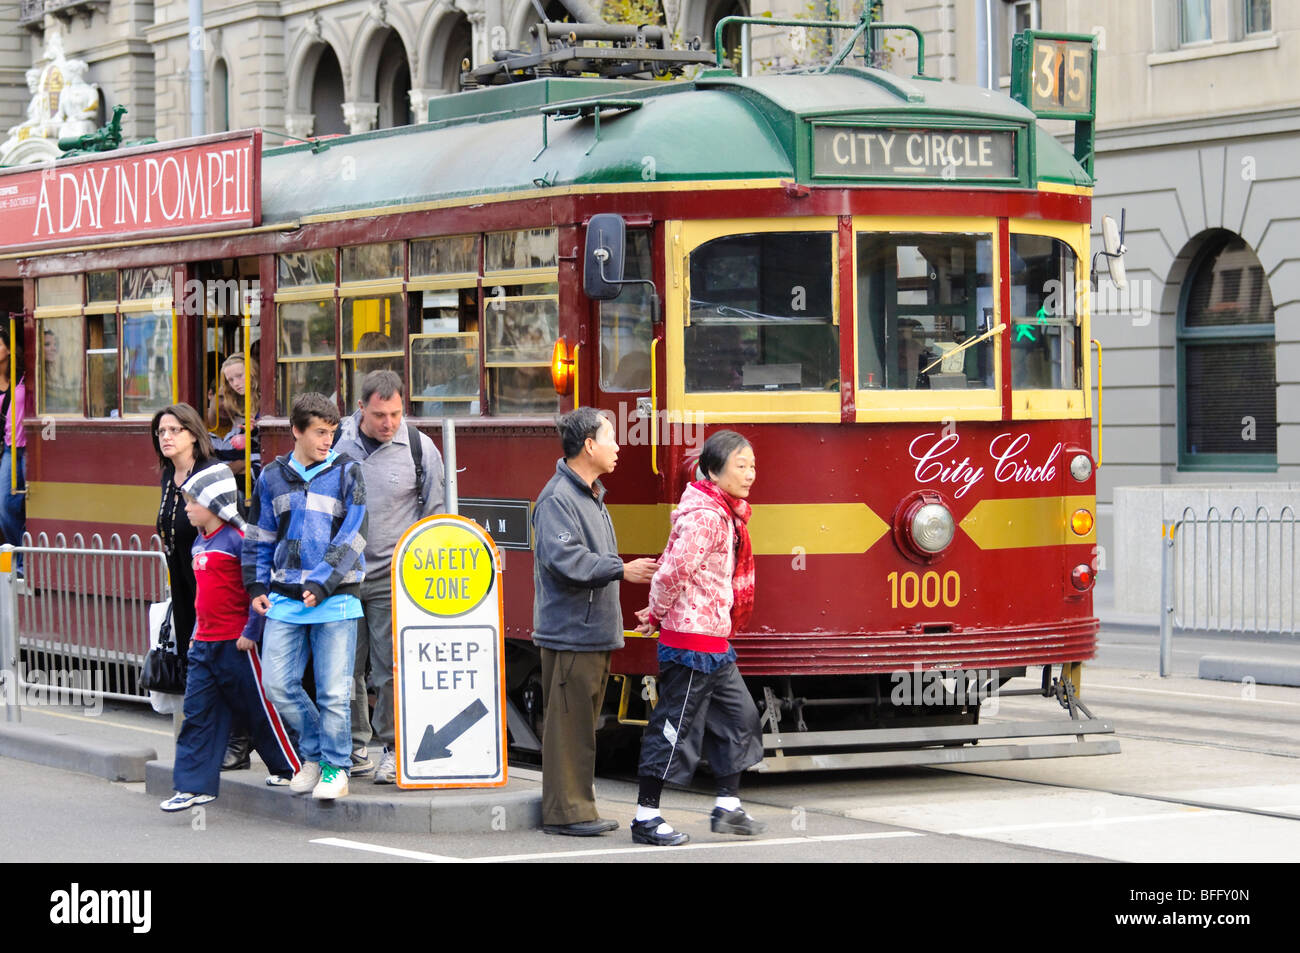 The ubiquitous trams contribute to the quirky character of the city of Melbourne, Australia. Click for details. Stock Photo